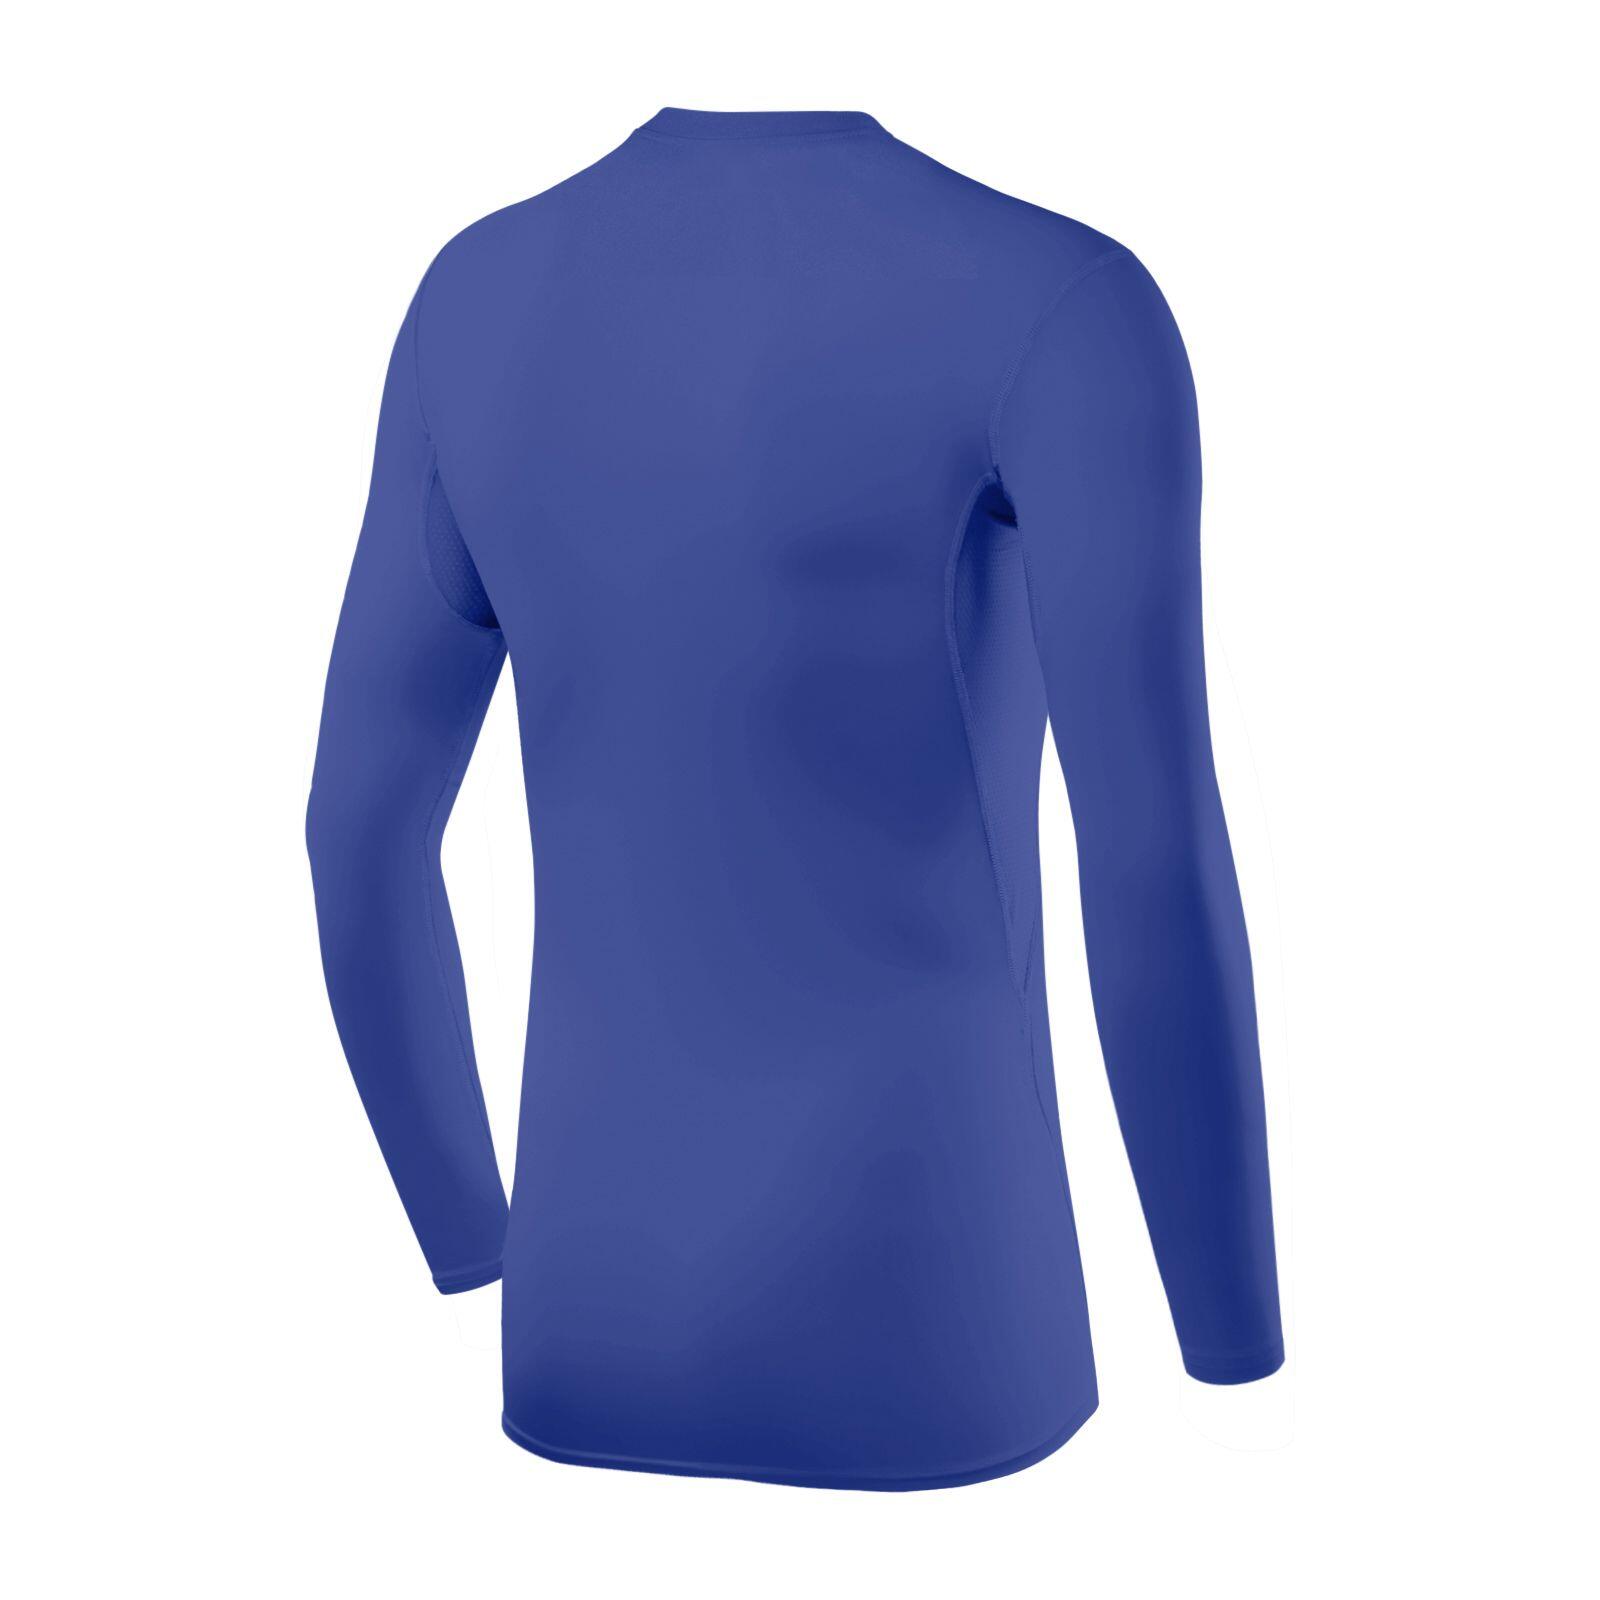 Boys' HyperFusion Breathable Base Layer Compression Top - Dazzling Blue 3/5